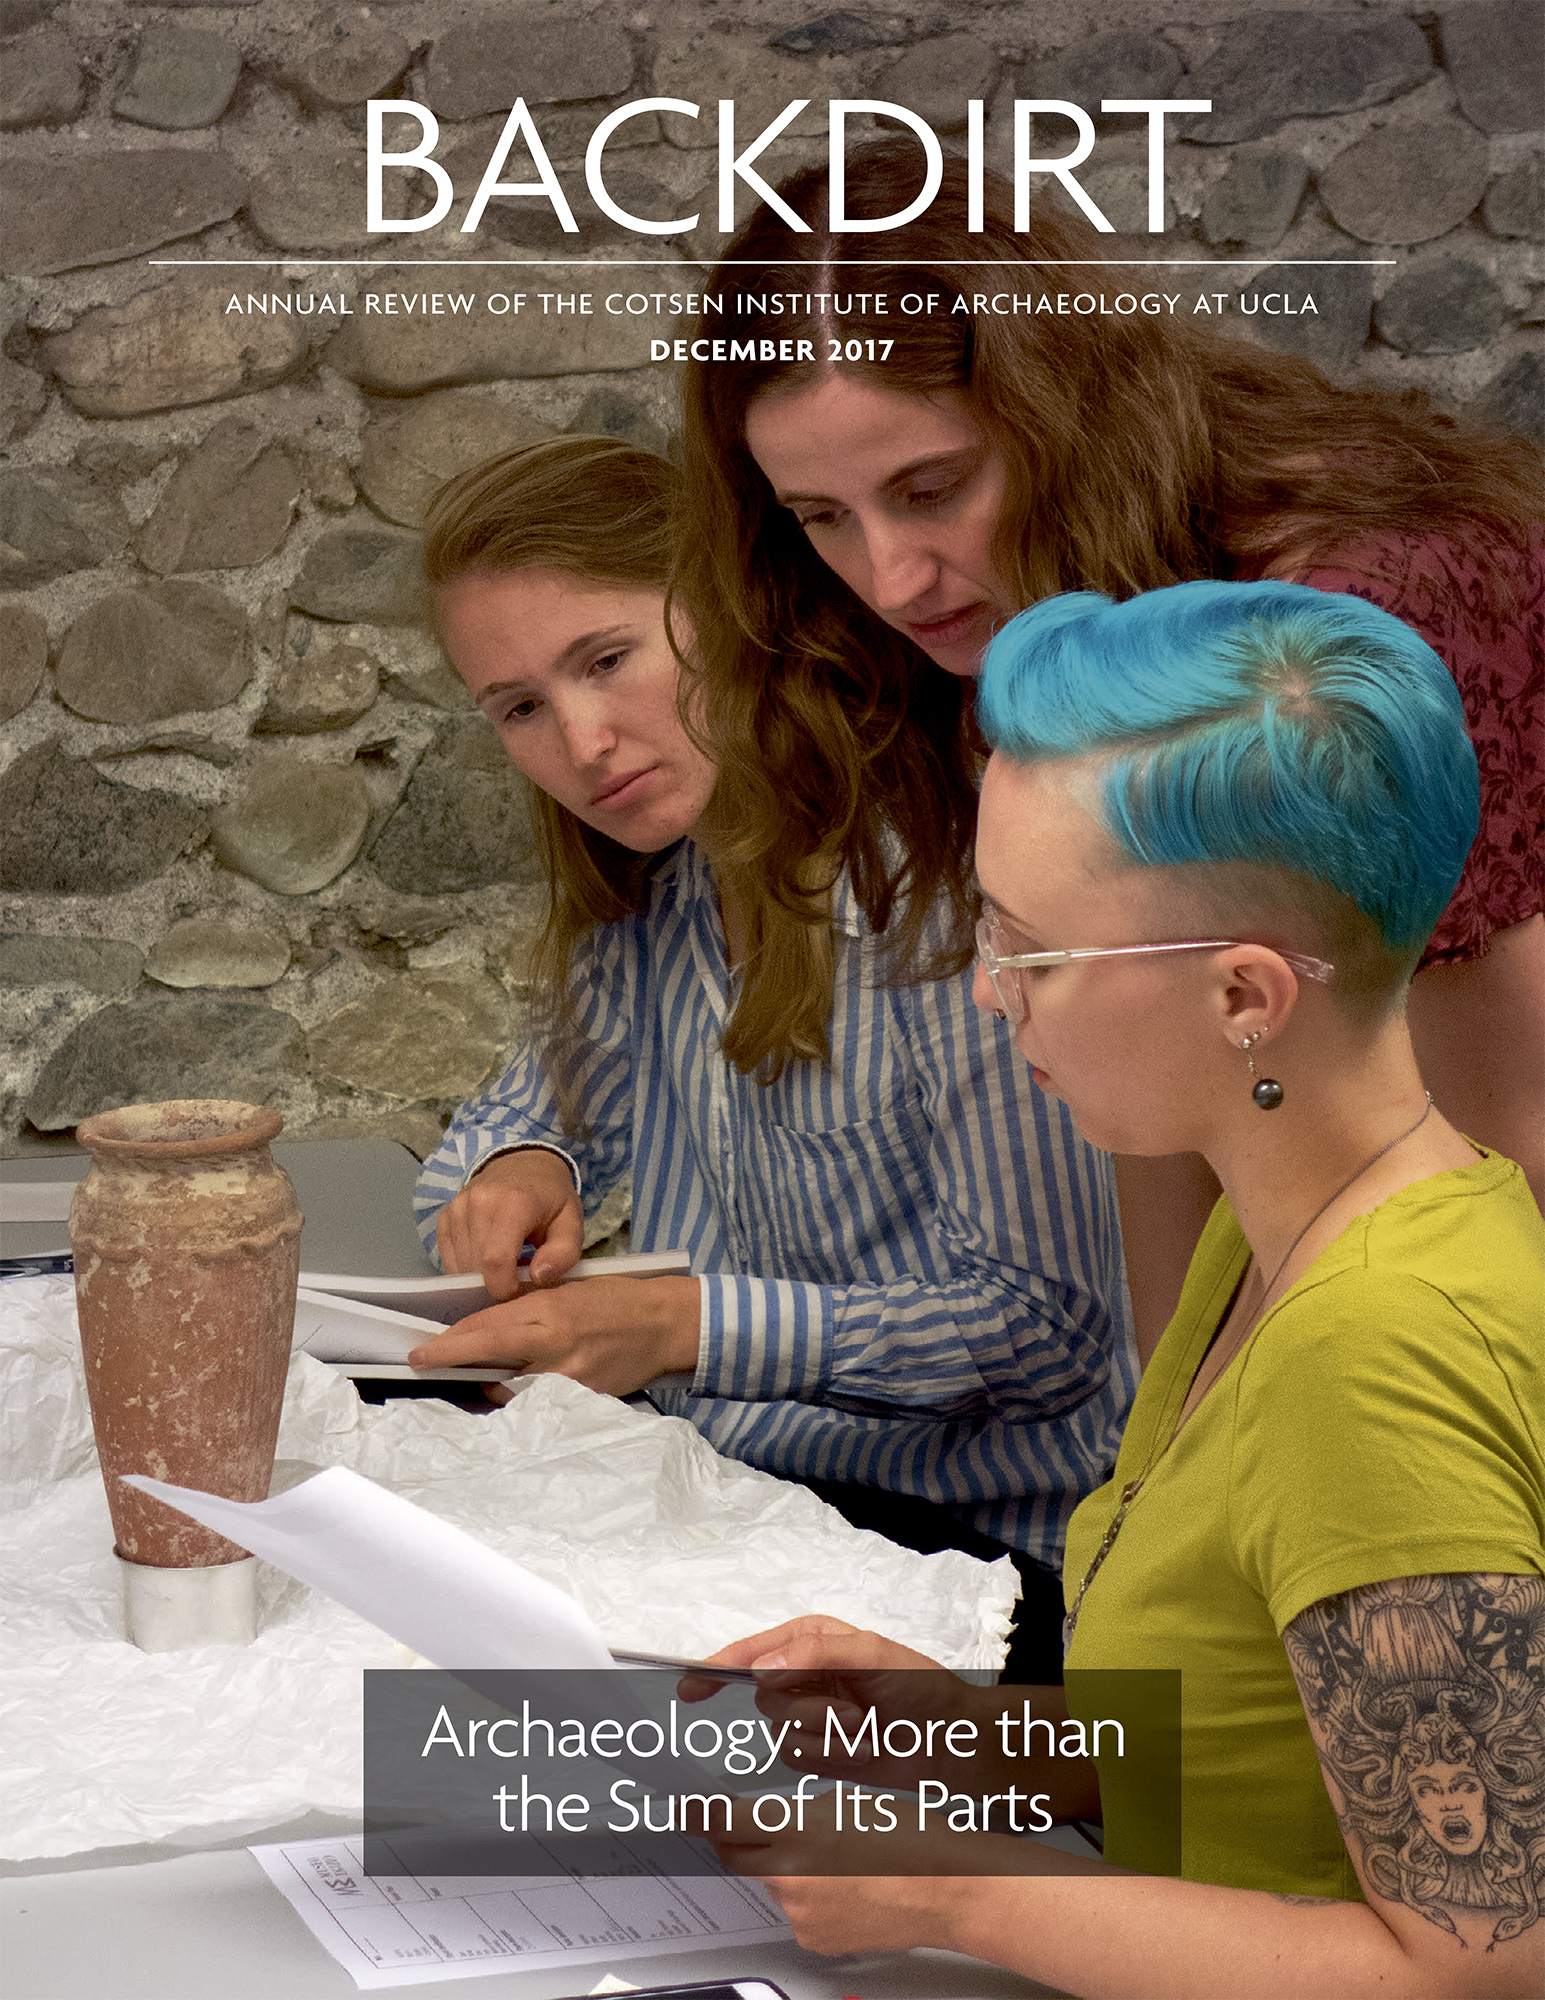 Backdirt annual review Cotsen Institute of Archaeology, UCLA December 2017